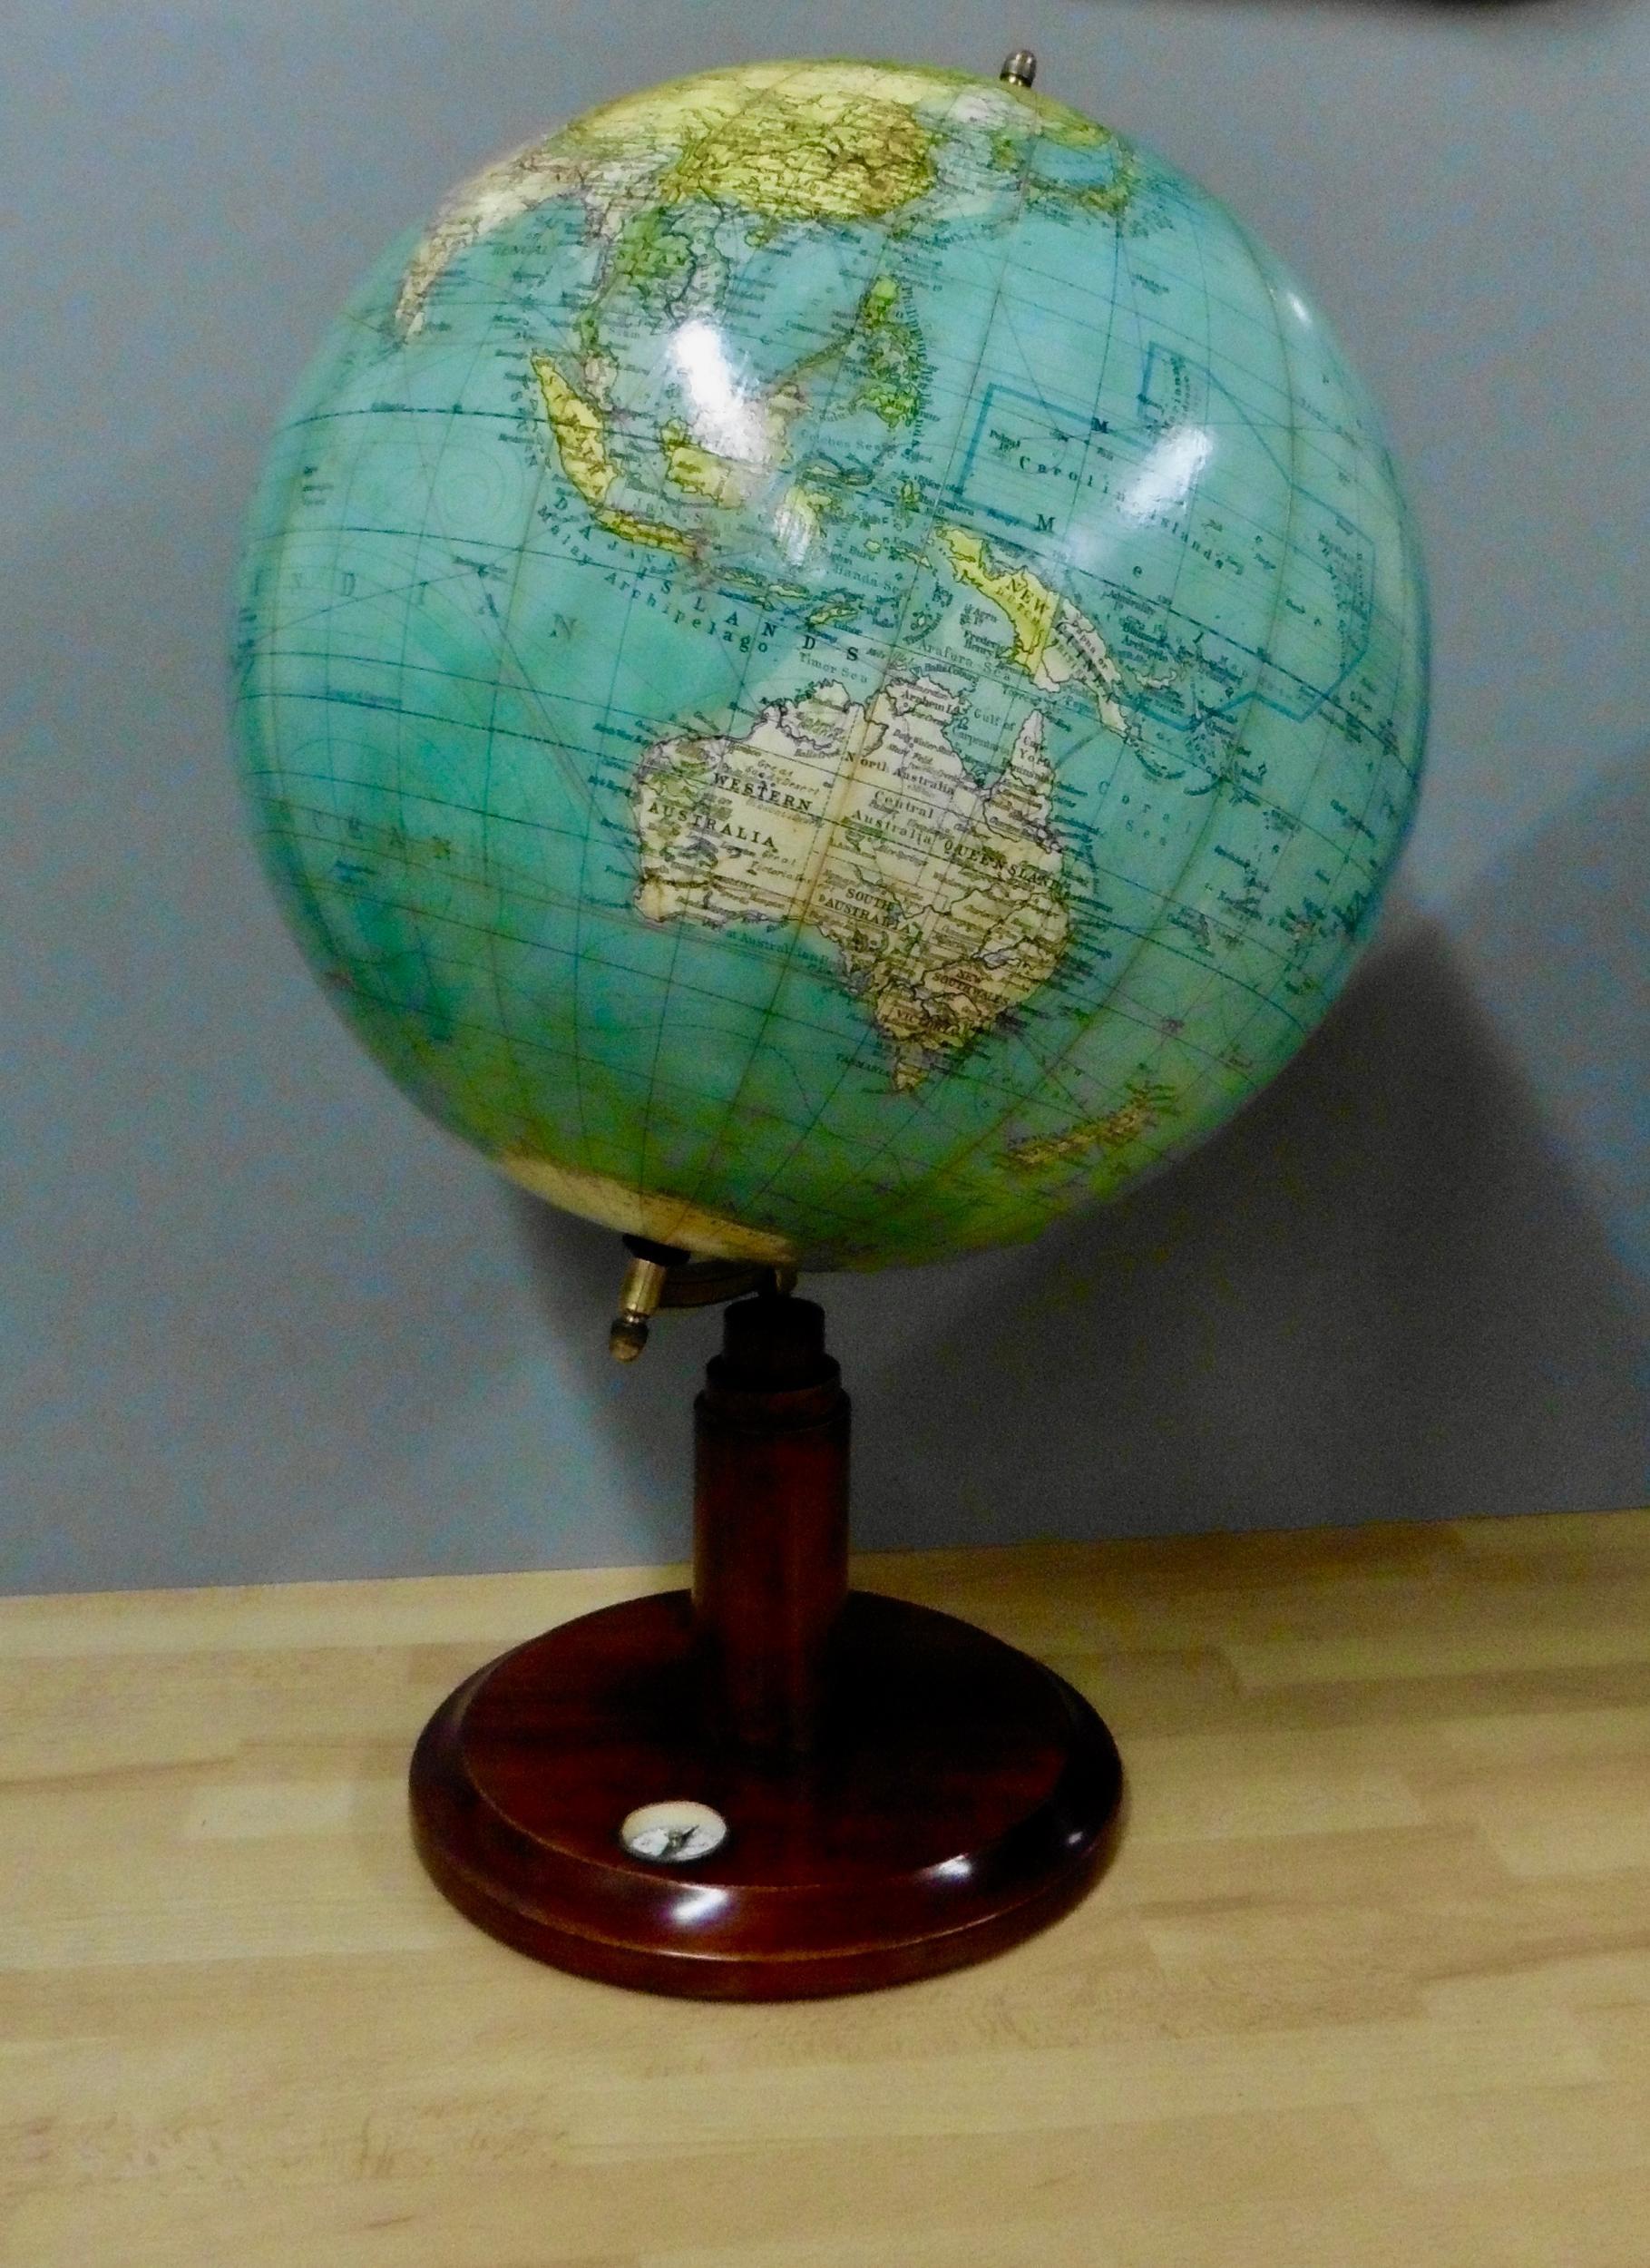 Edwardian celestial globe

Edwardian celestial globe standing on a circular mahogany base with inset compass and stepped pillar support with polished brass Meridian marked from 0 to 80 degrees, surmounted by a turned finial.

The globe is in